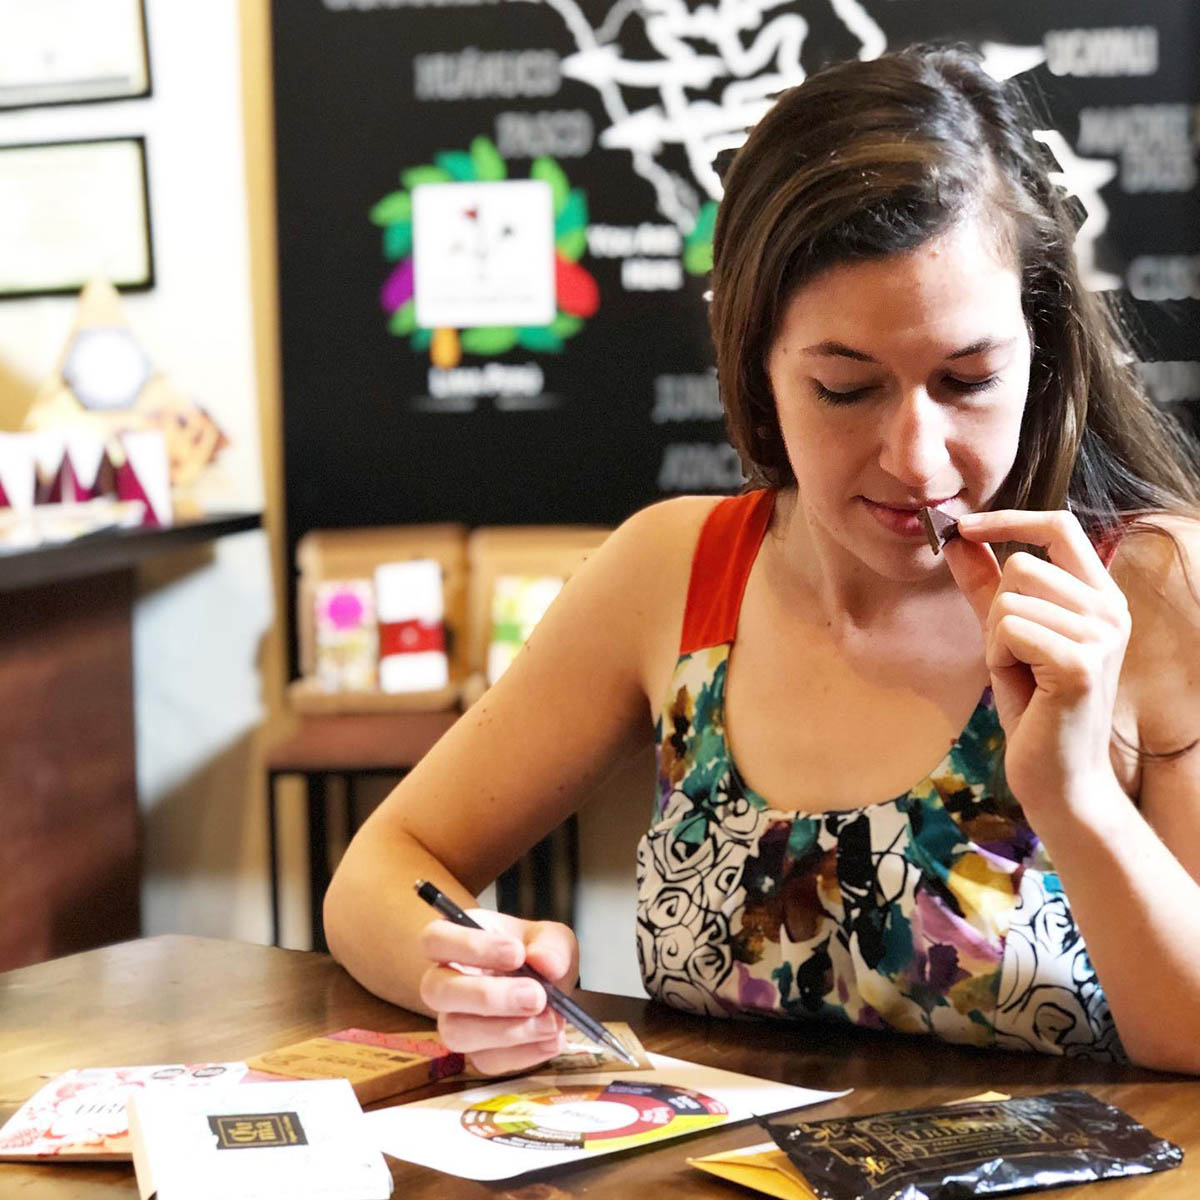 Women sampling different types of Peruvian chocolate at El Cacaotal cacao boutique in Lima.